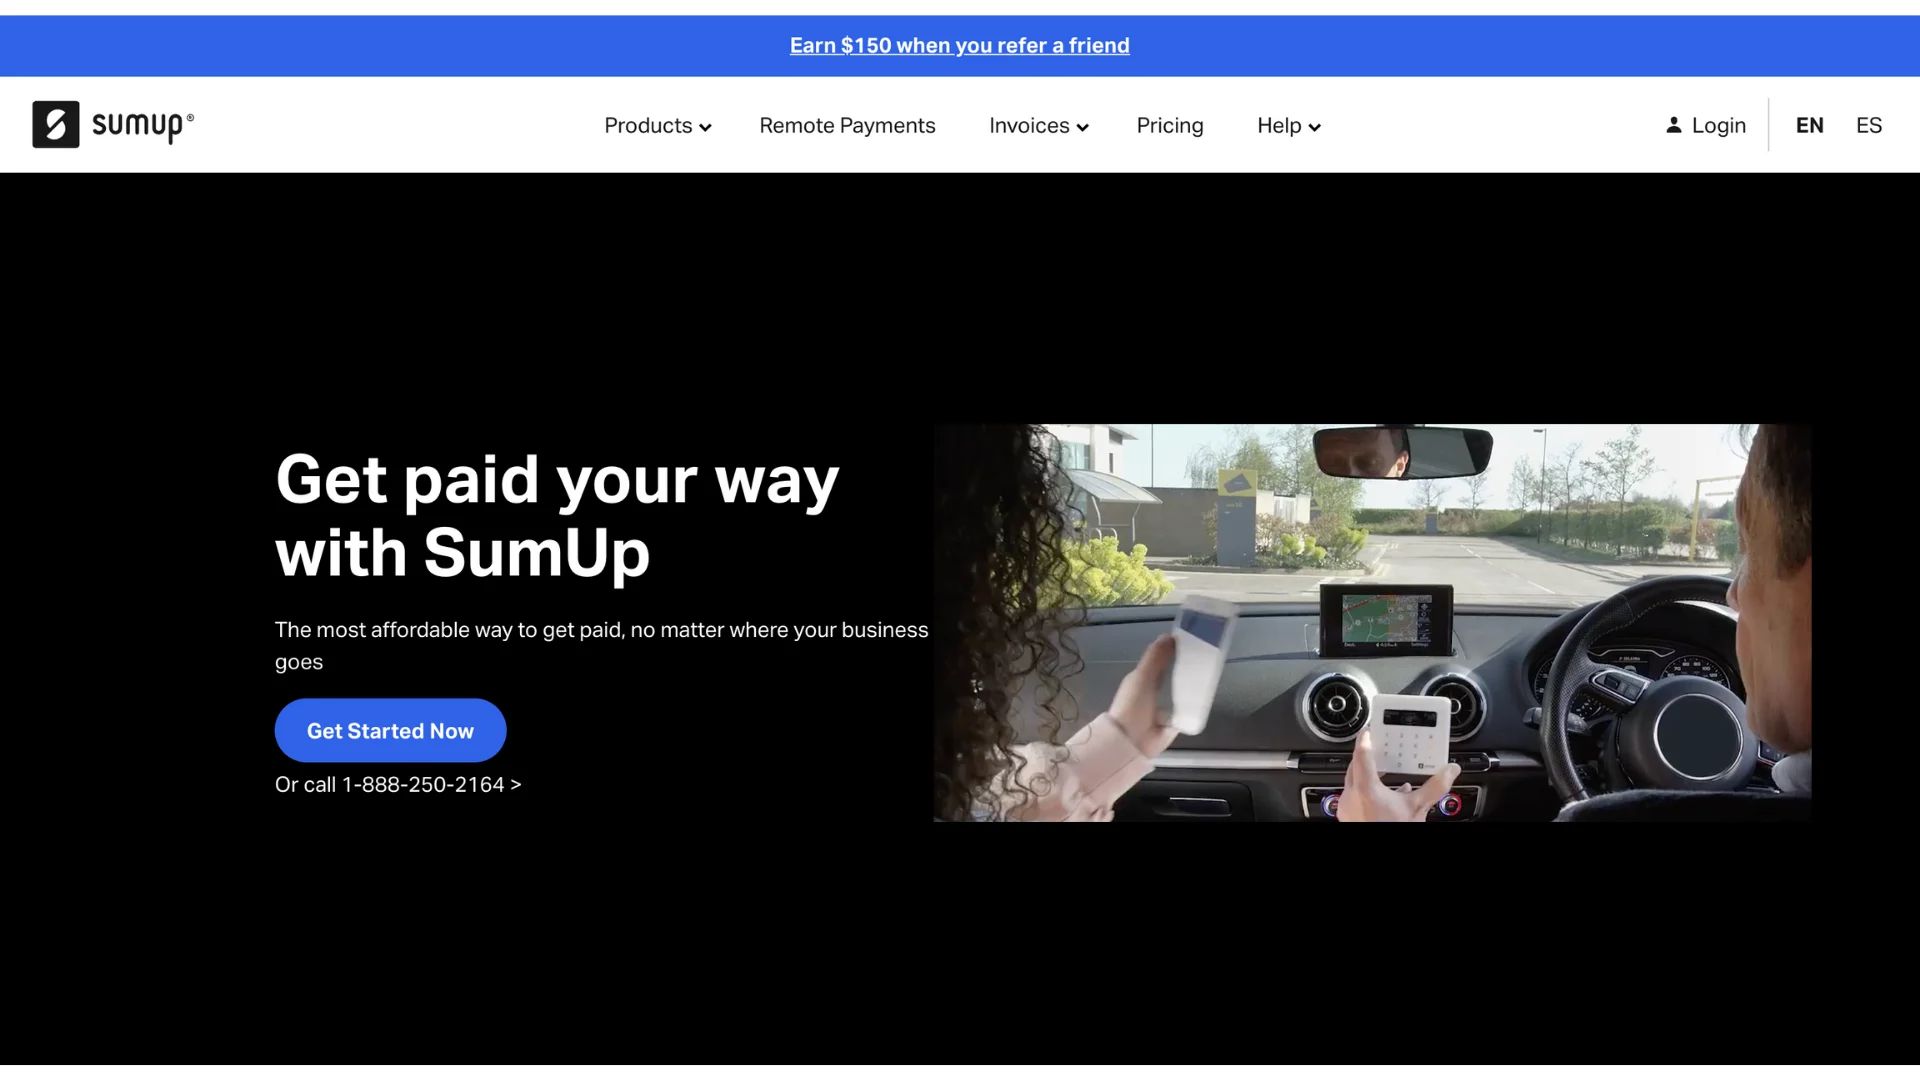 SumUp Industry Based Personalization - After